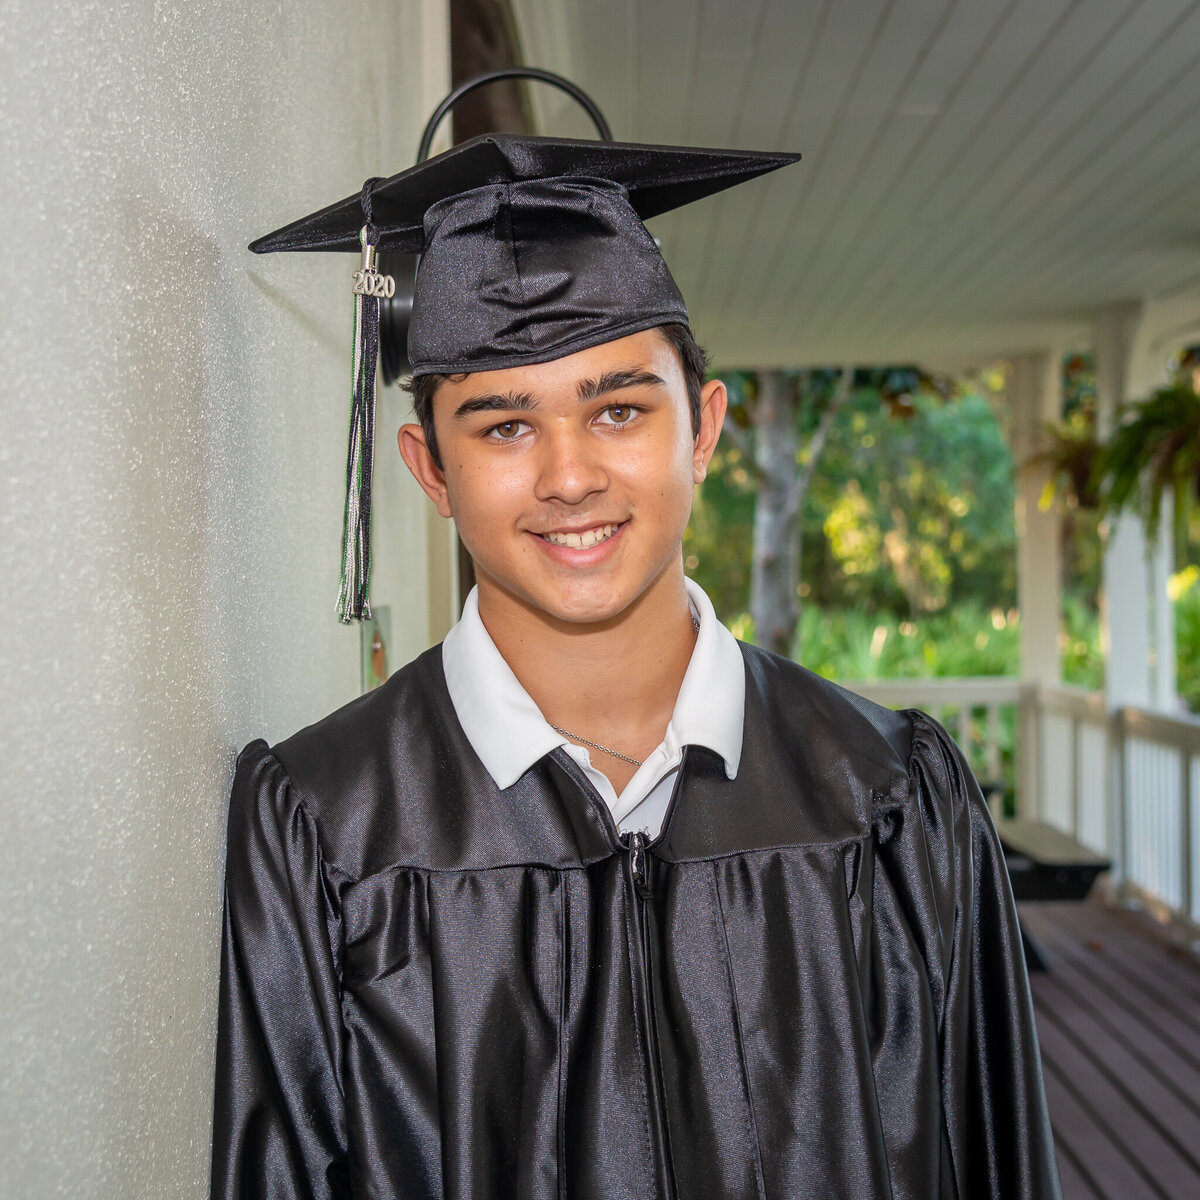 A senior poses for his cap and gown photos